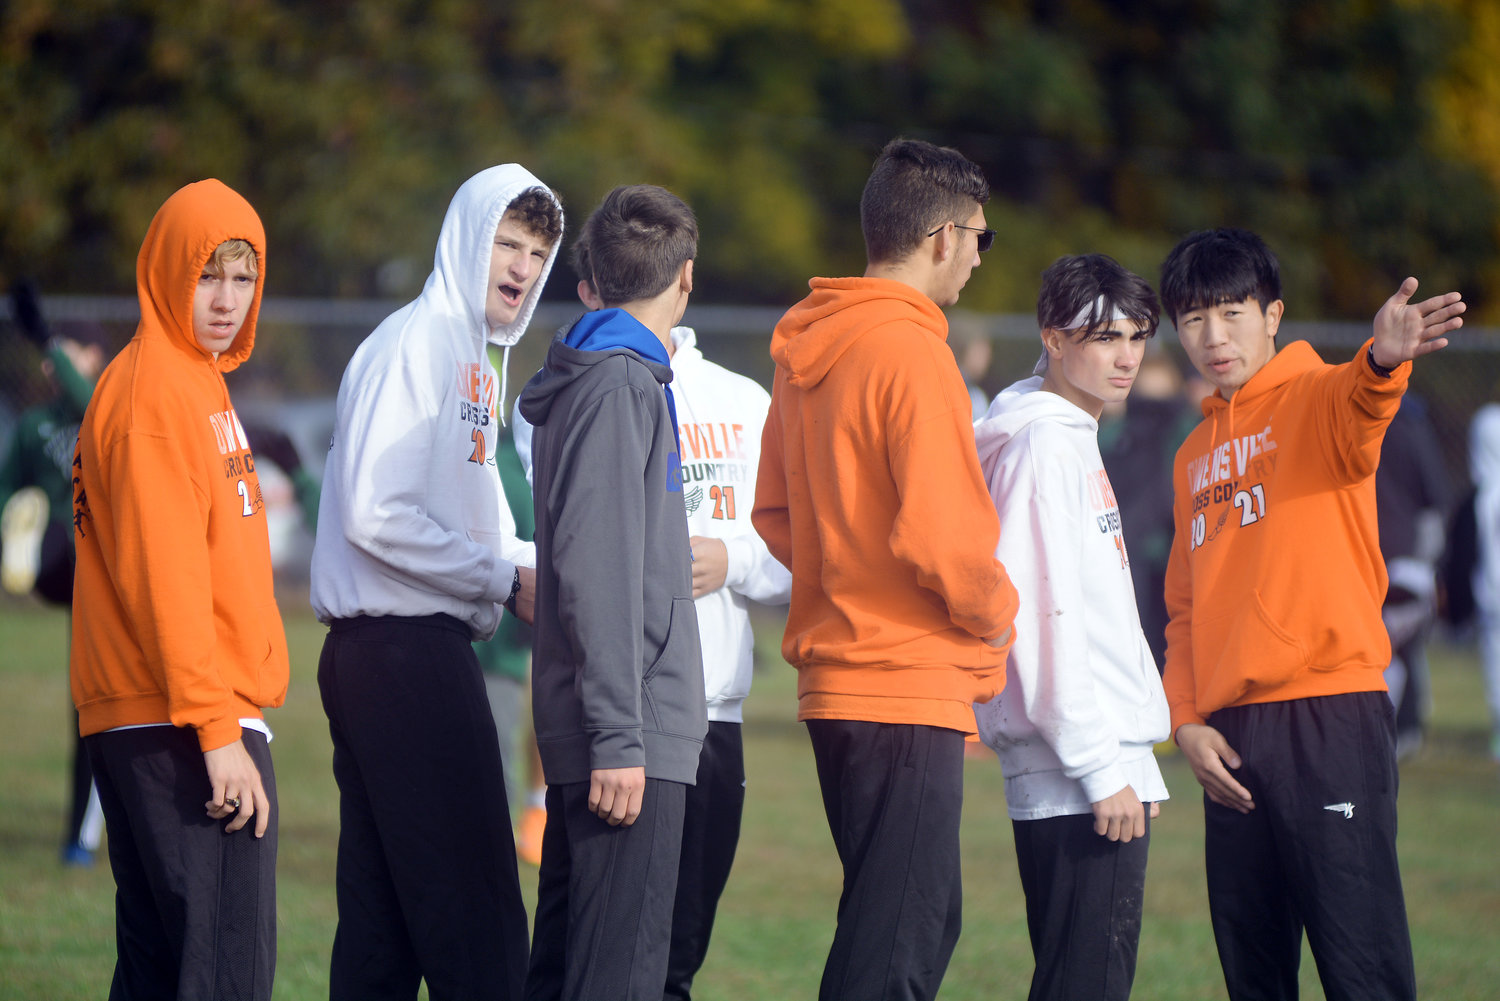 Freddy Zheng (far right) gives a few pointers about the course at the Osage County Fairgrounds during the MSHSAA Class 3, District 3 Cross Country meet held Saturday in Linn.